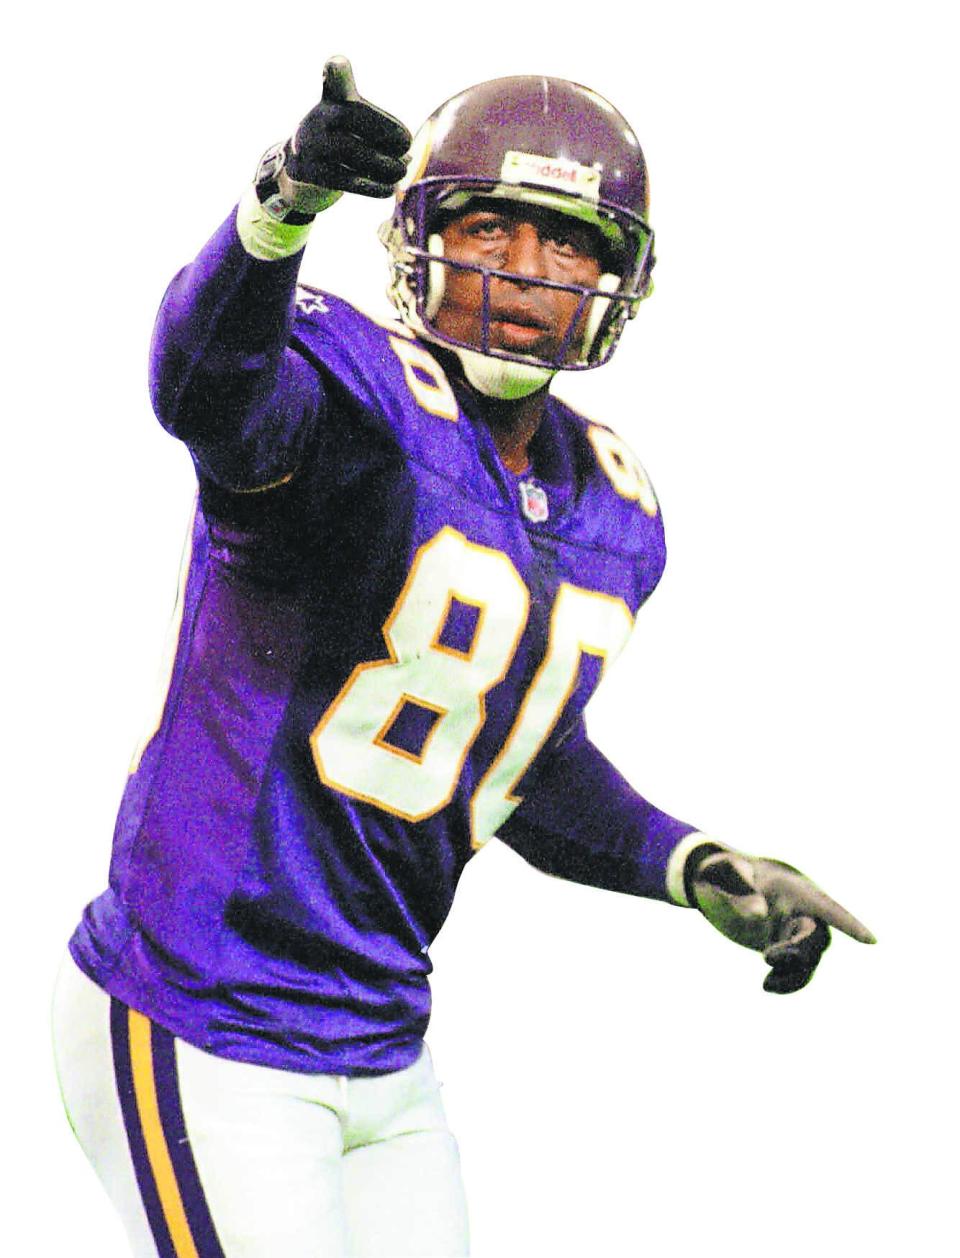 No Hall of Fame wide reciever has more career catches against the Lions than Cris Carter, who racked up 110 receptions playing against them in the NFC Central.